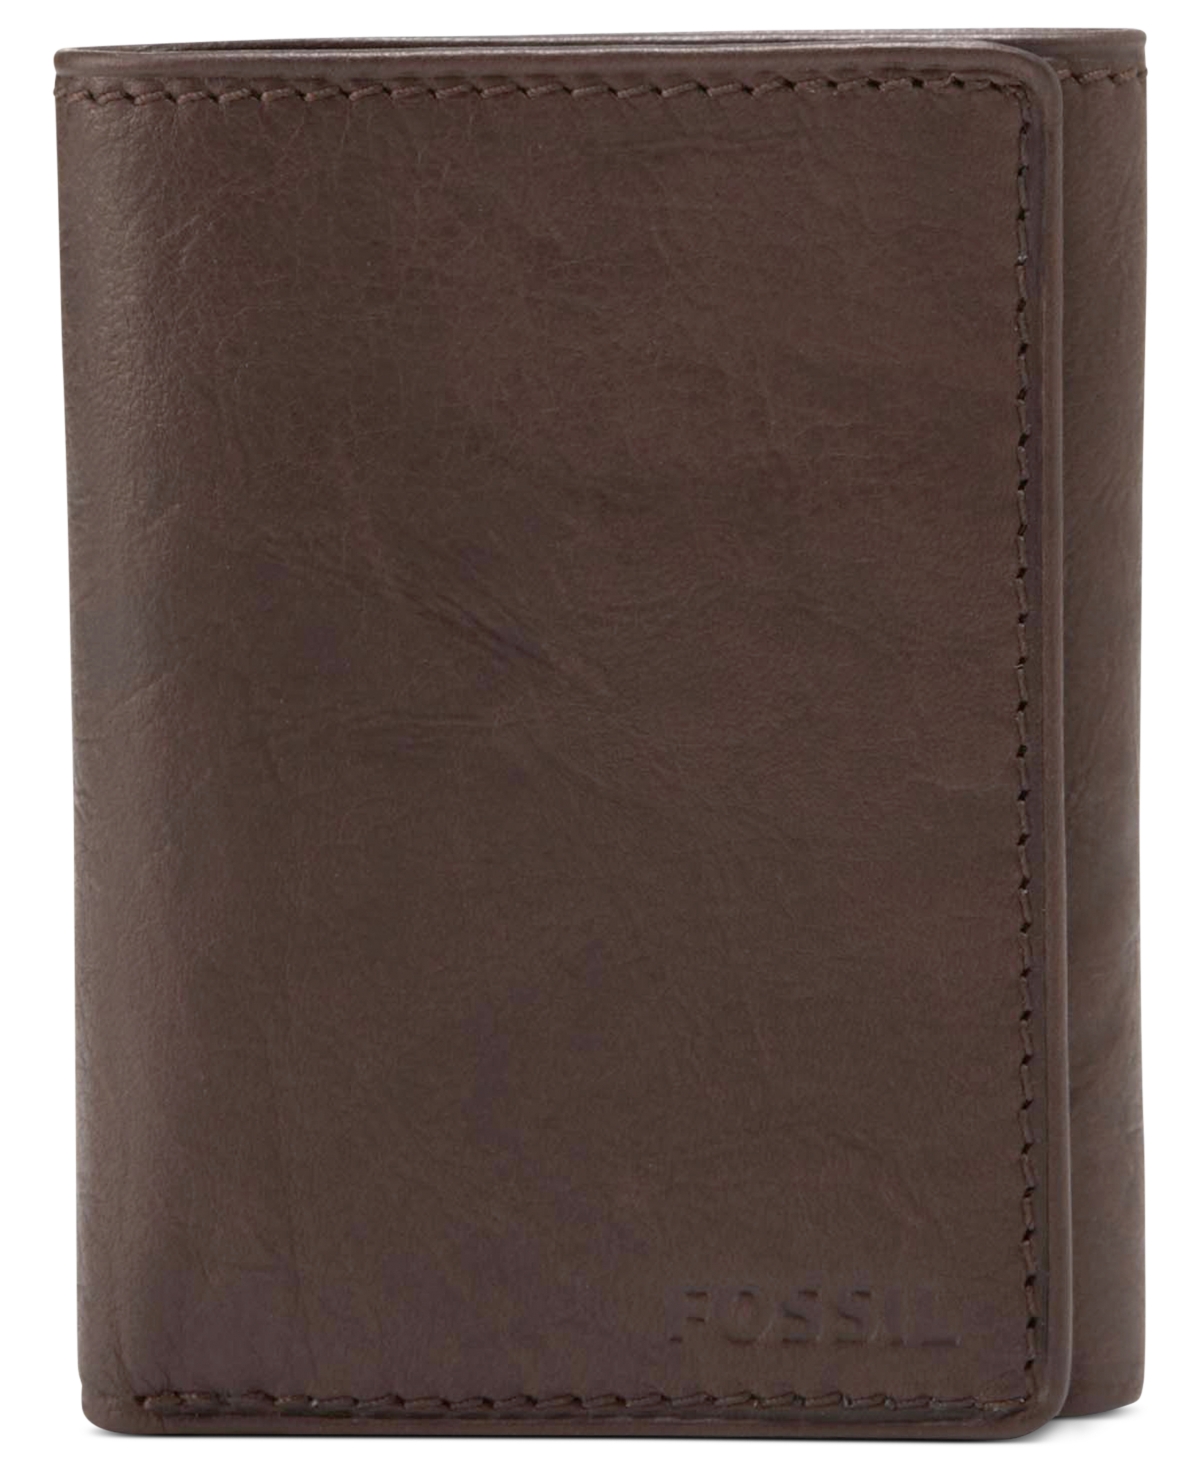 Fossil Men's  Ingram Extra Capacity Trifold Leather Wallet In Brown